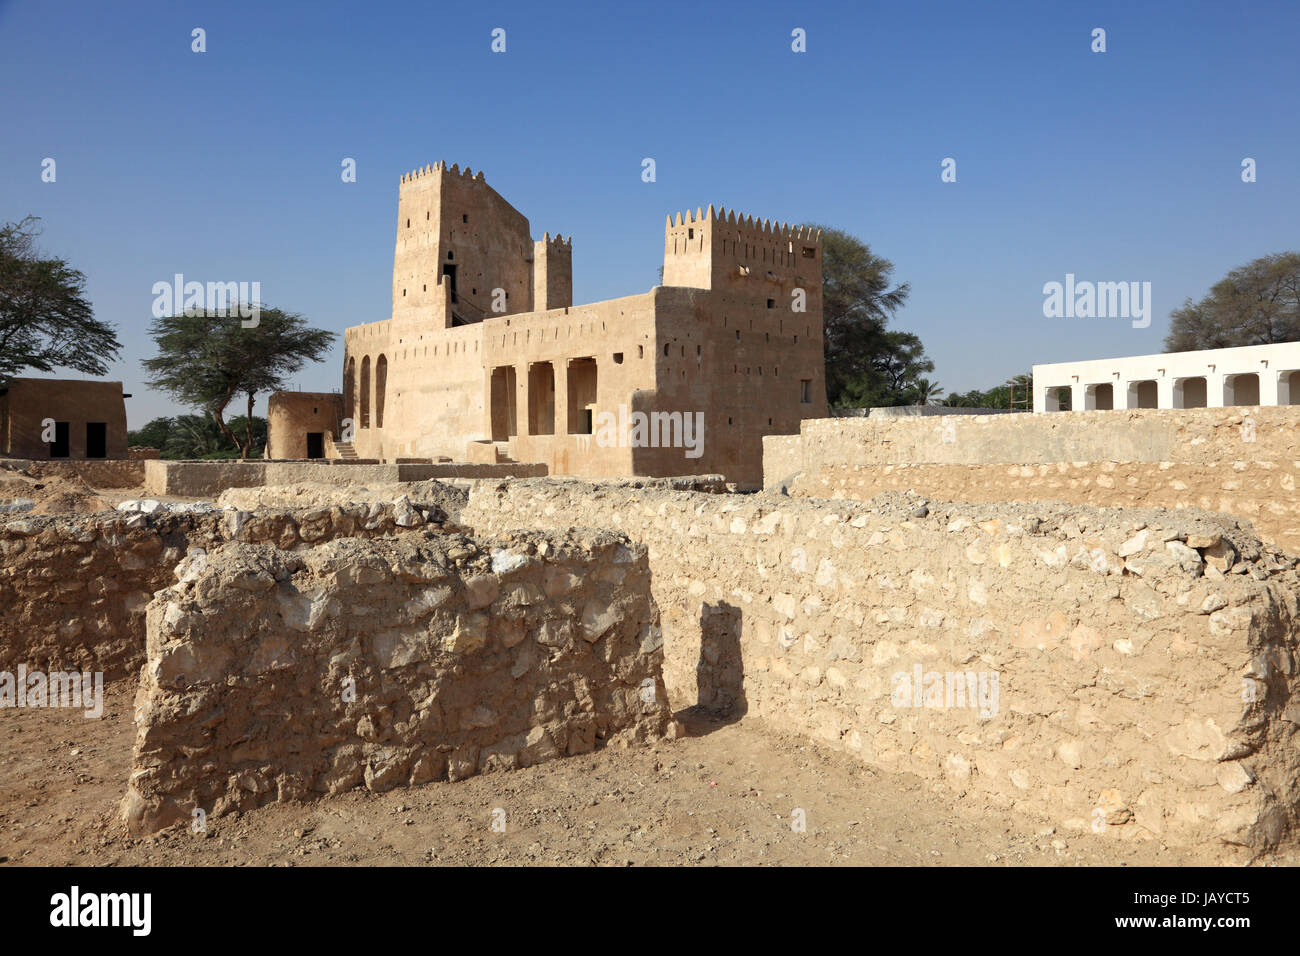 The historic Barzan Tower in Doha, Qatar, Middle East Stock Photo